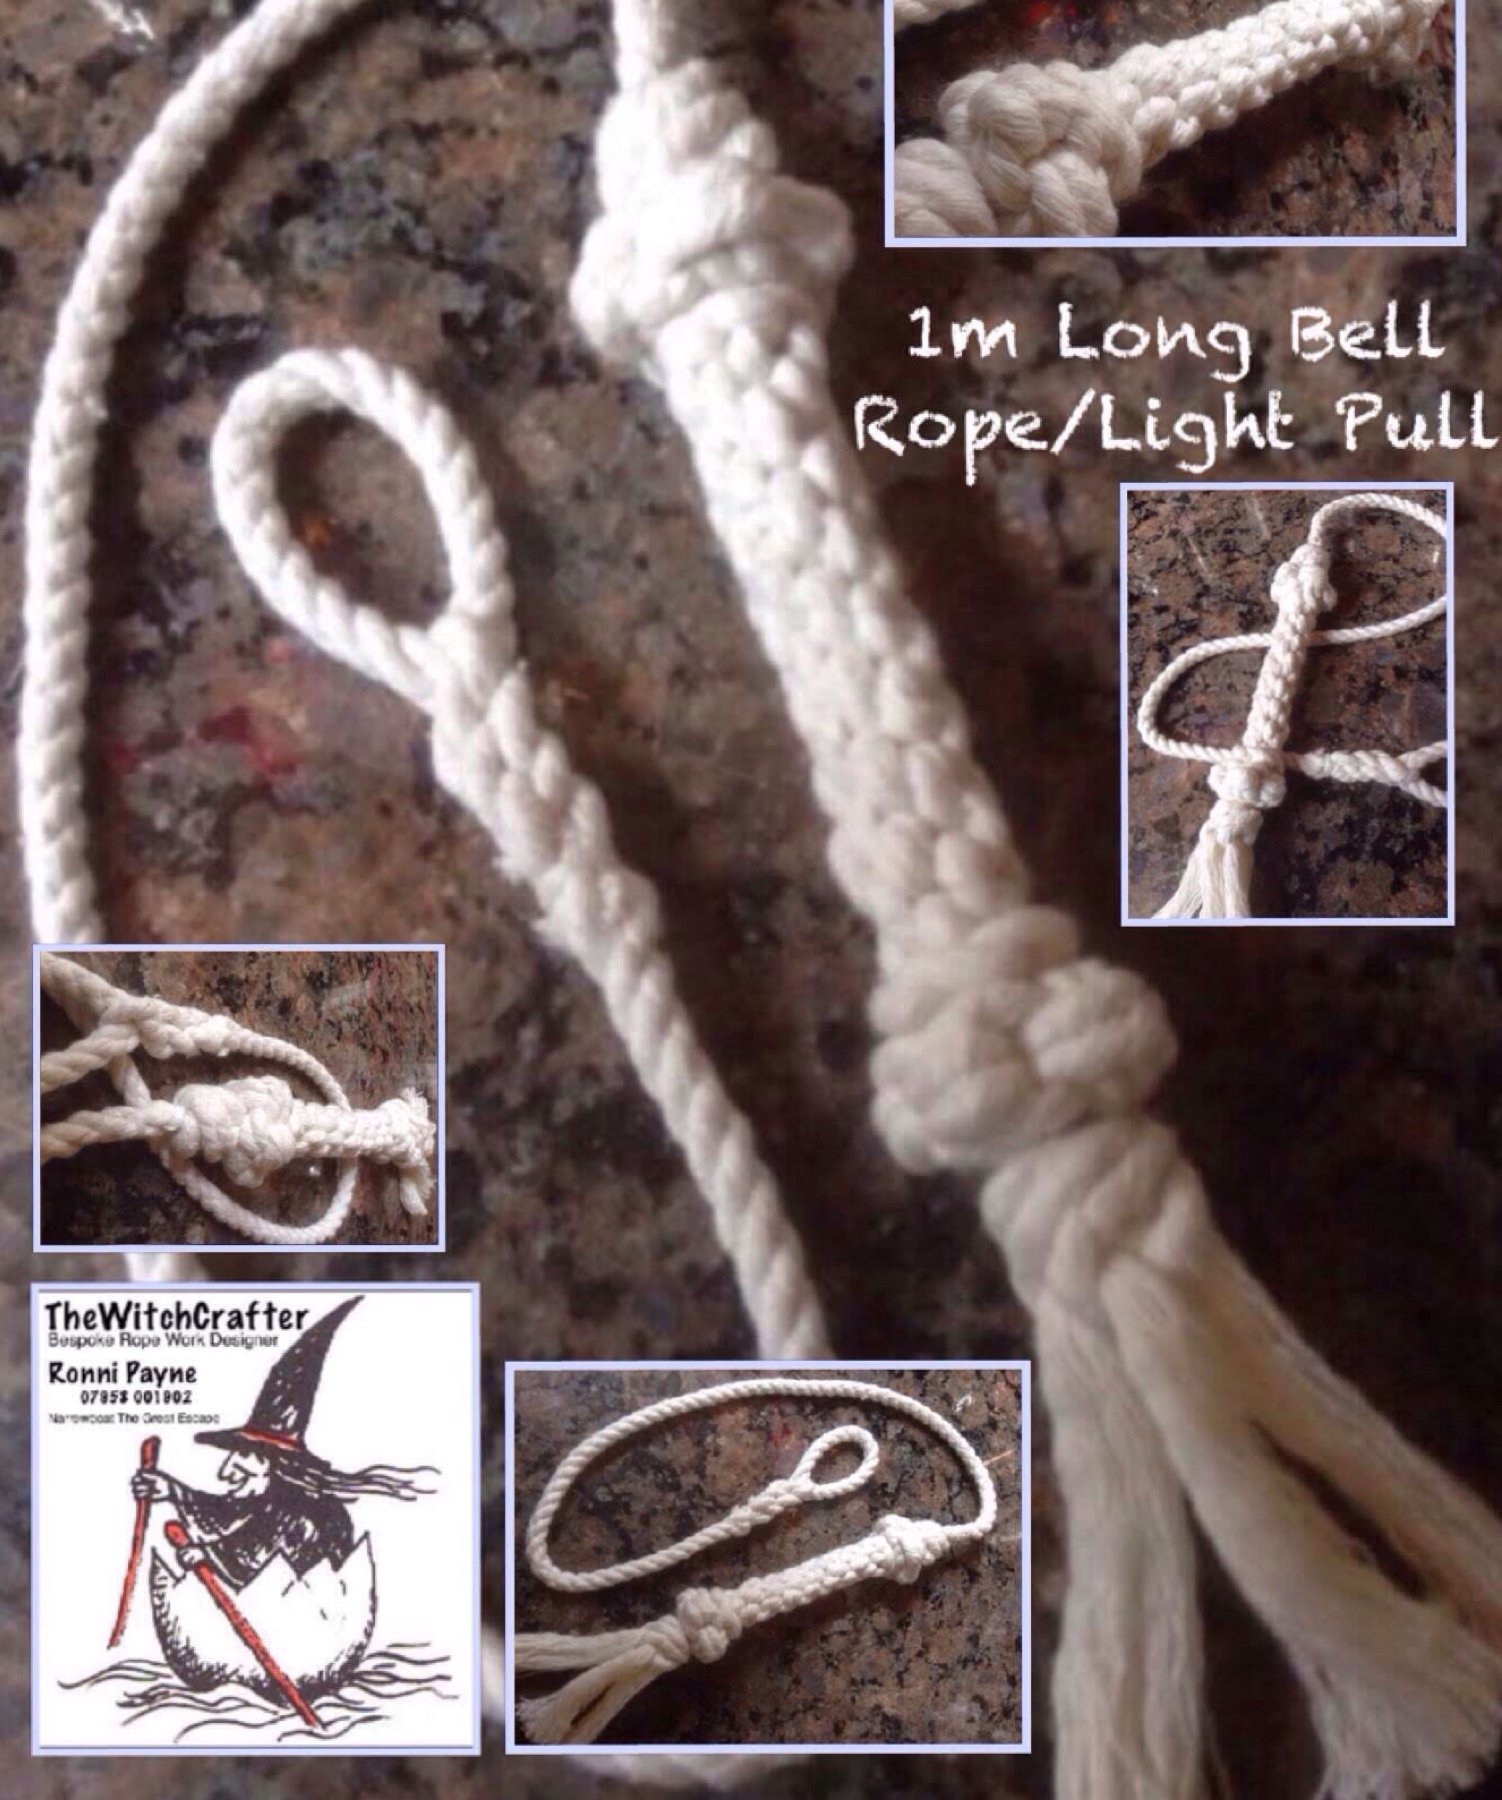 TheWitchCrafter on X: Unusual Gift Idea - Handmade Decorative 1m Nautical  Light Pull #buyitoffaboat #canaltraders #rope #ropework Made to order in  time for xmas. Other colours available :0)  / X